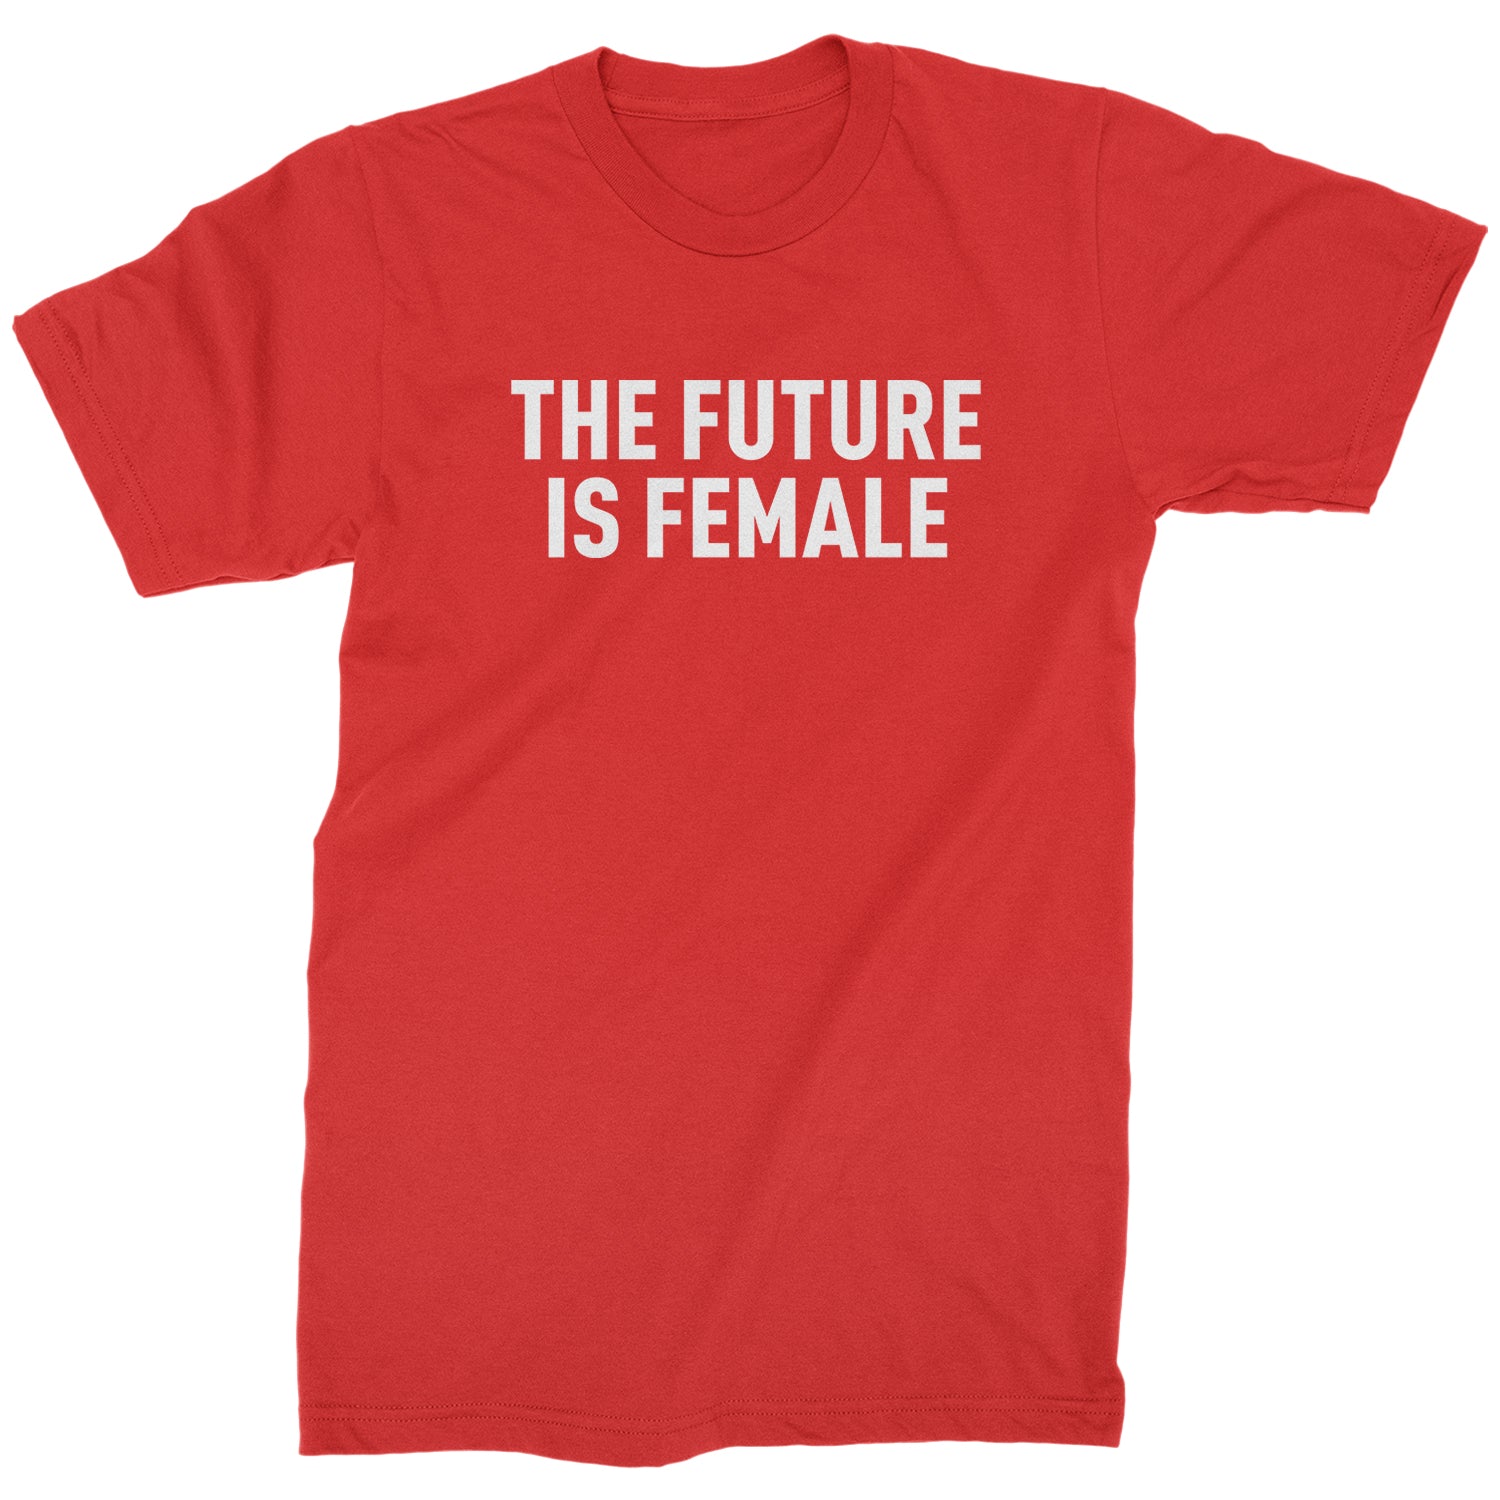 The Future Is Female Feminism Mens T-shirt female, feminism, feminist, femme, future, is, liberation, suffrage, the by Expression Tees